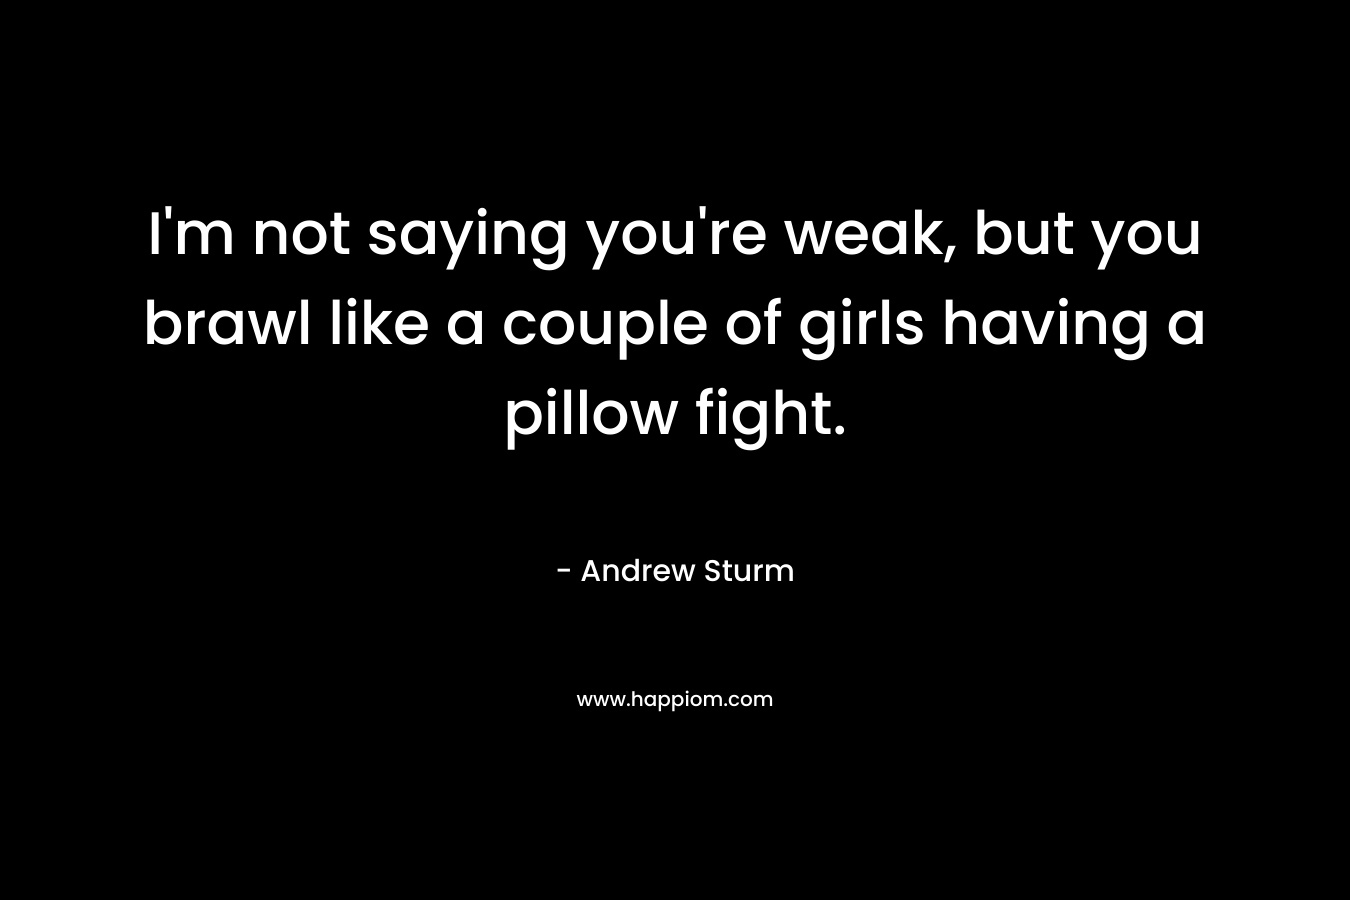 I’m not saying you’re weak, but you brawl like a couple of girls having a pillow fight. – Andrew Sturm